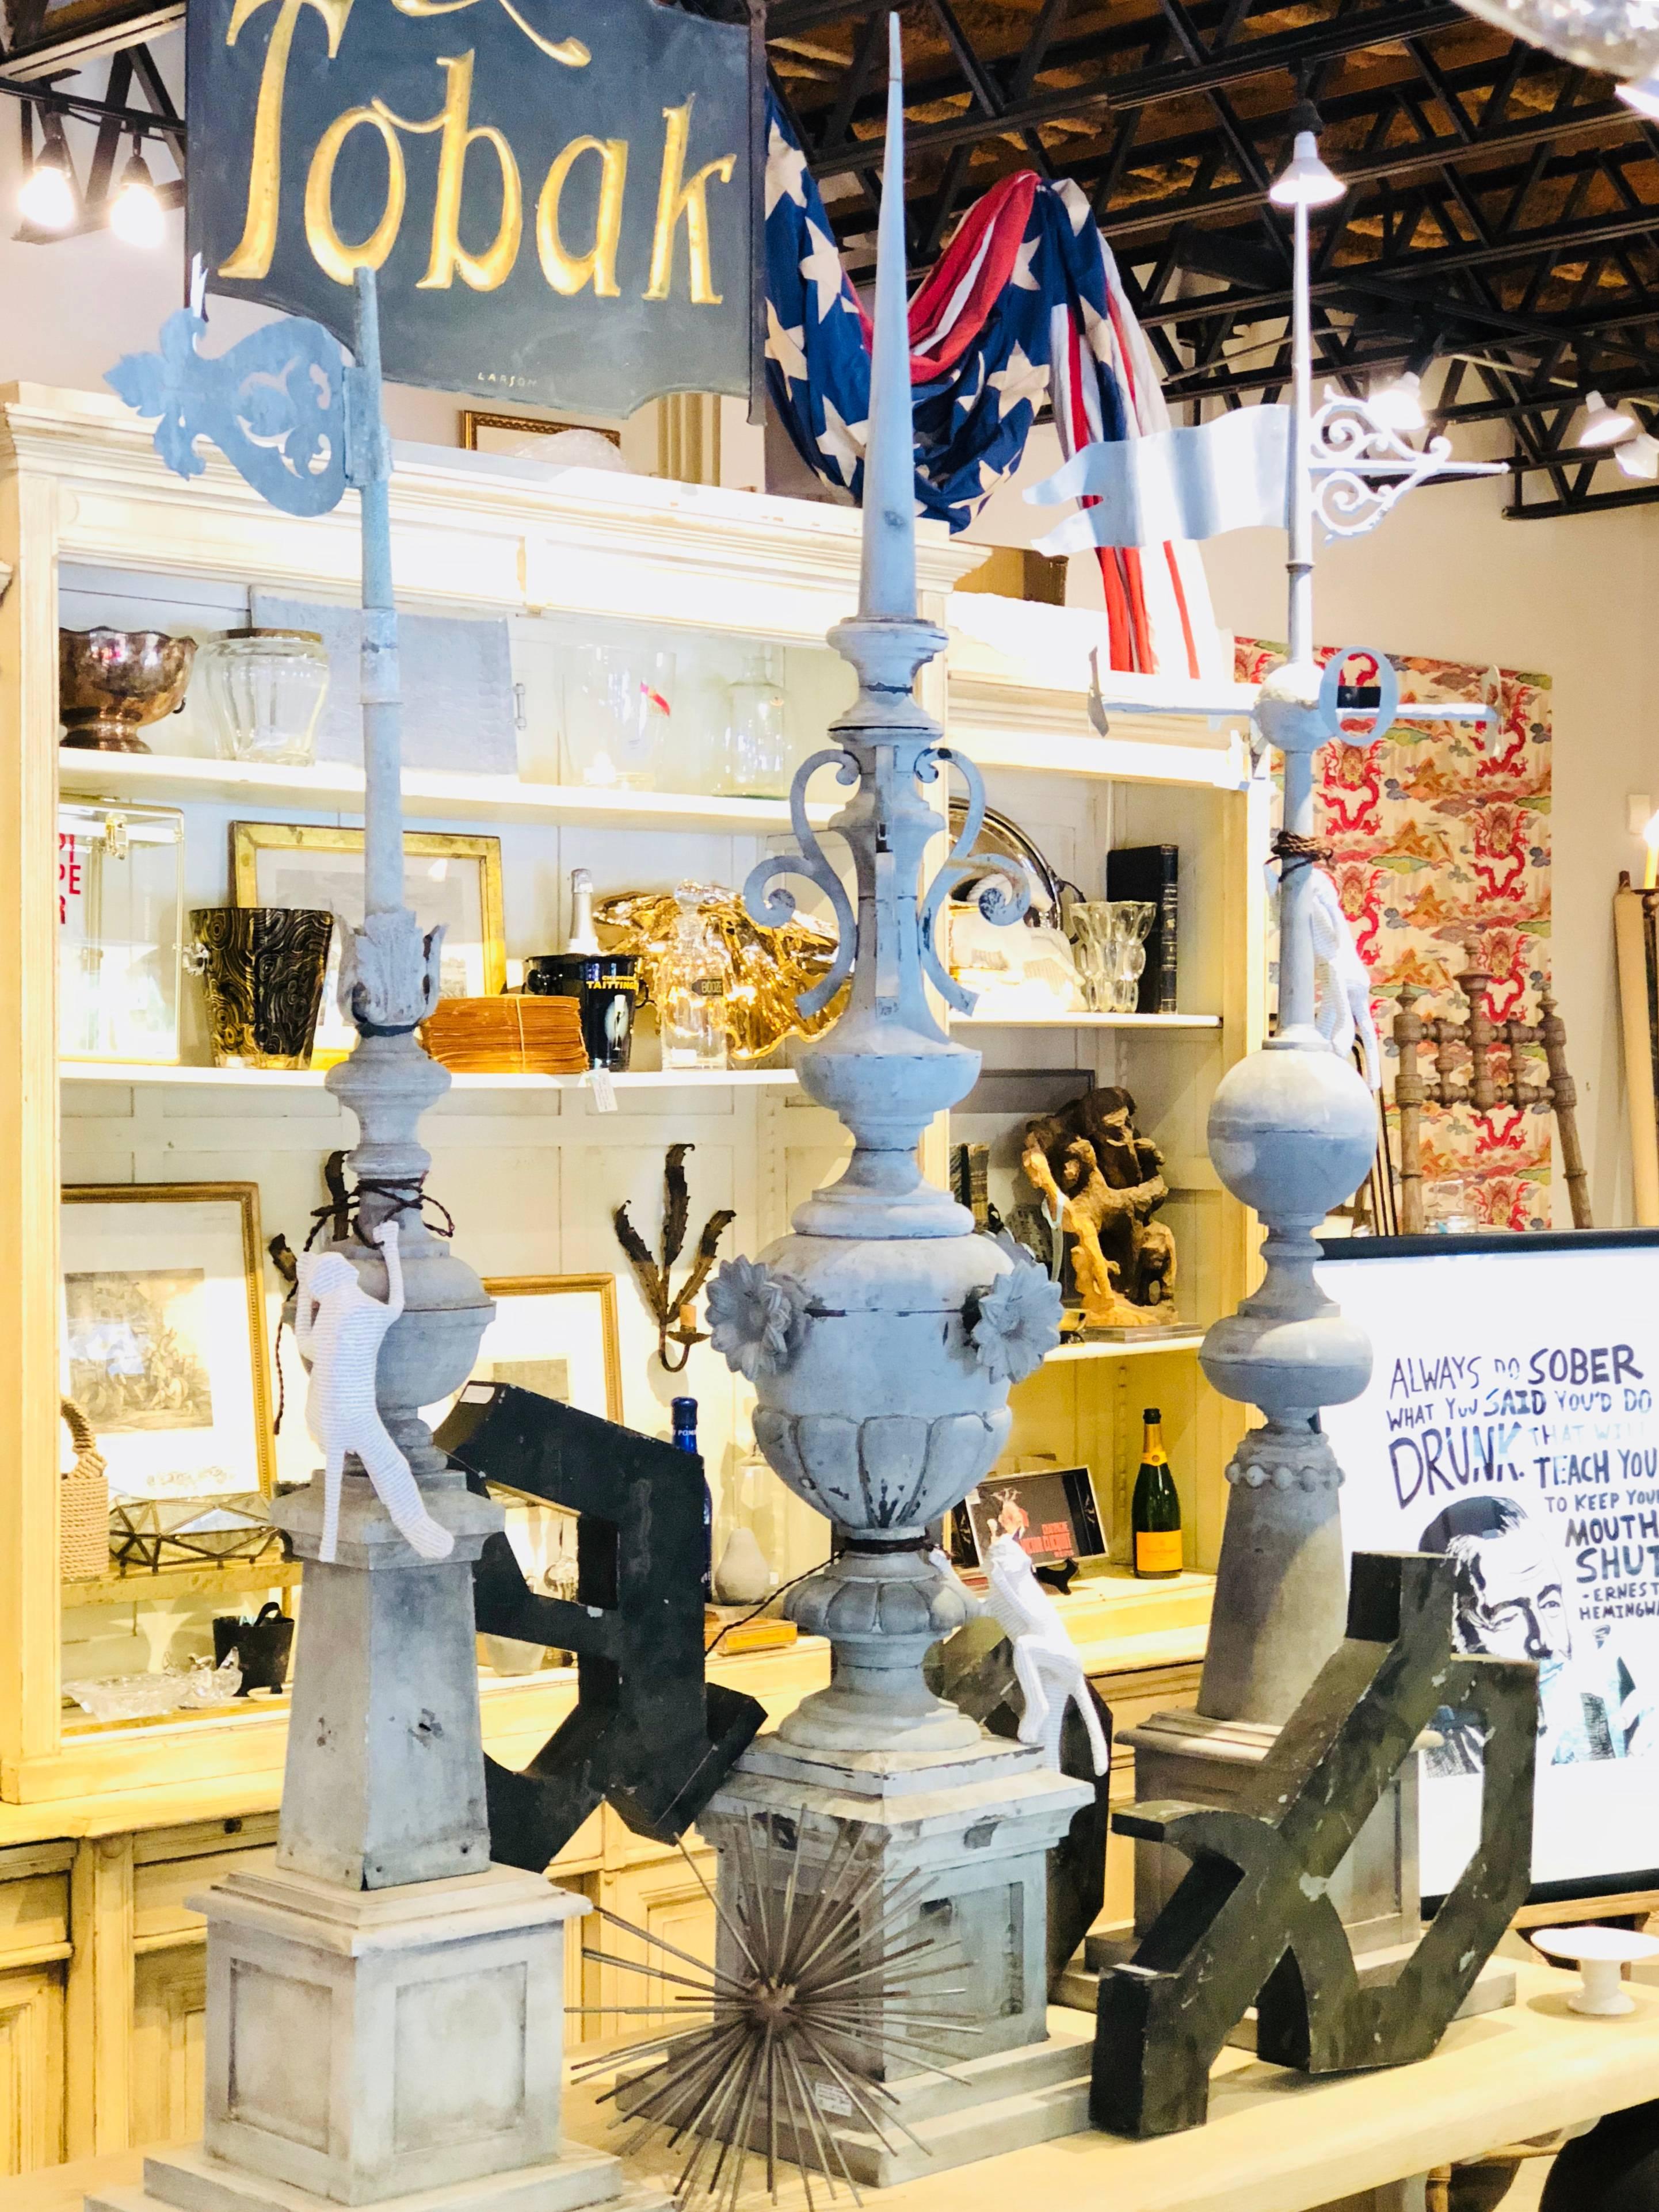 We sourced a small grouping of antique French finials crafted from zinc and created custom bases for them to allow for artful display inside or out. This stunning piece is the largest of the three we have and features wonderful details like the